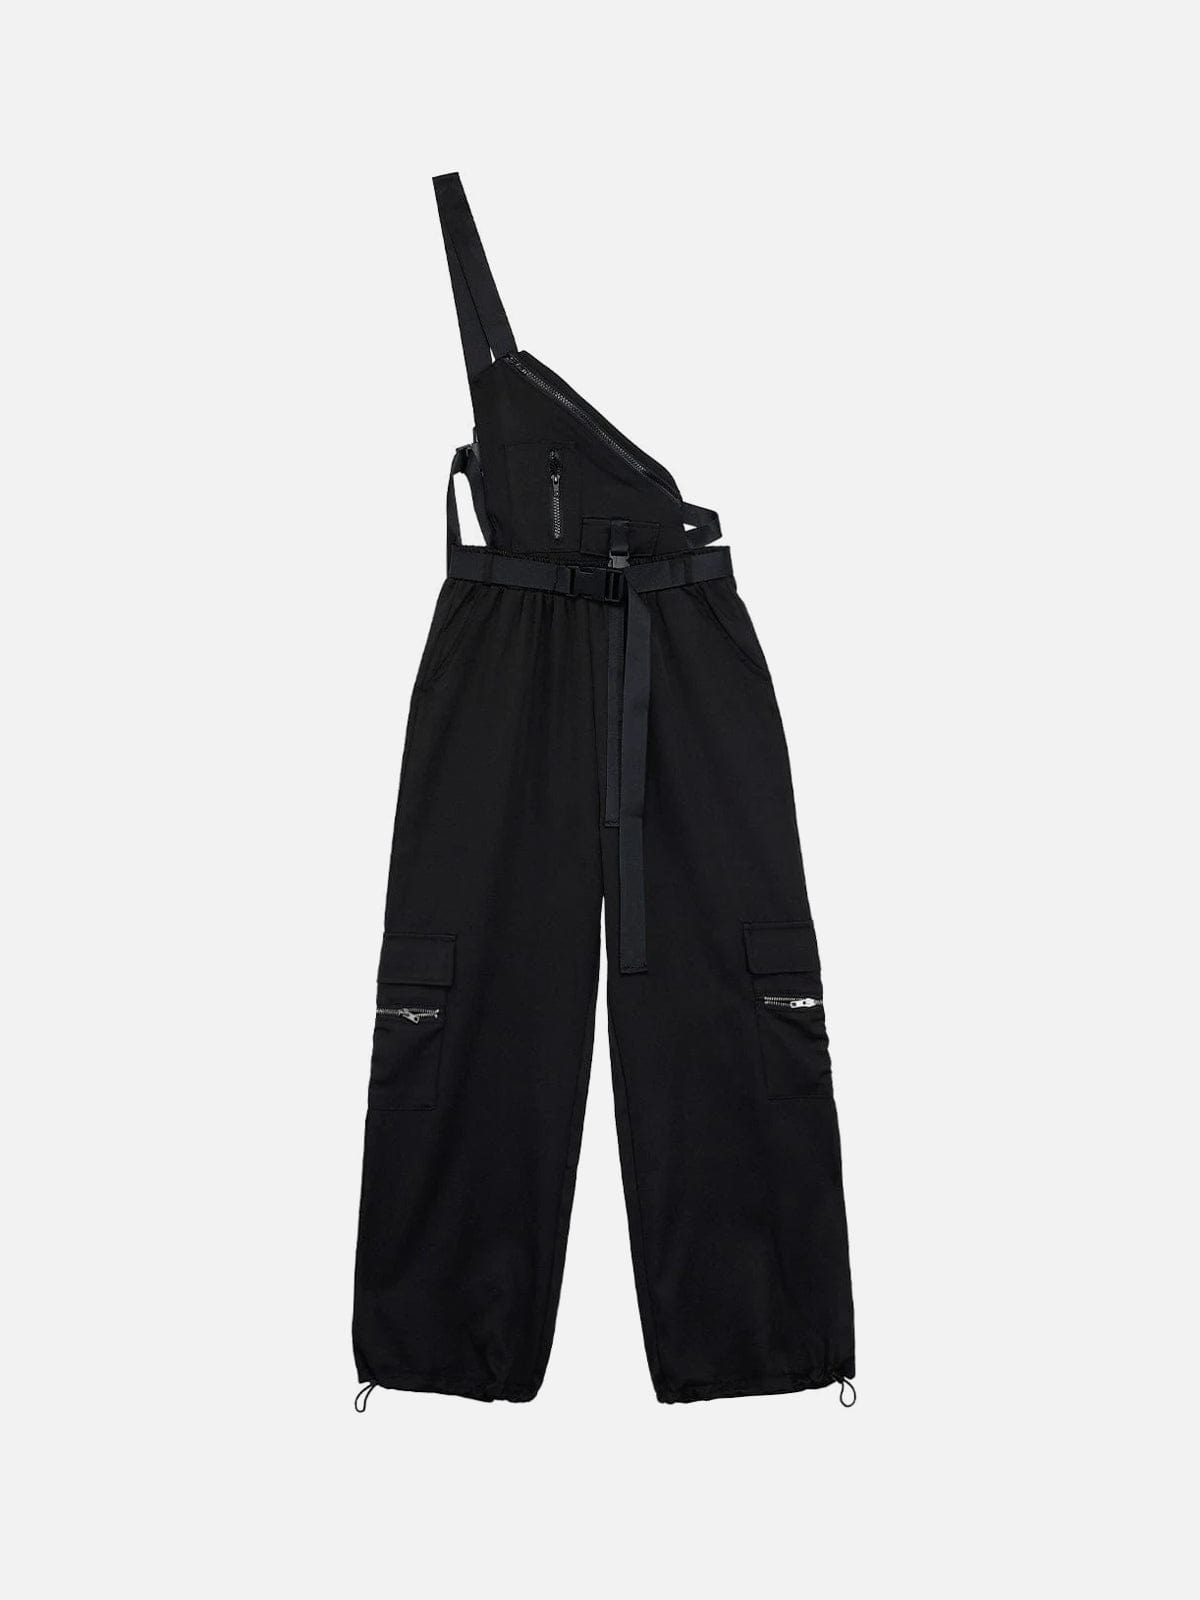 TO Detechable Personalized Buckle Belted Overalls